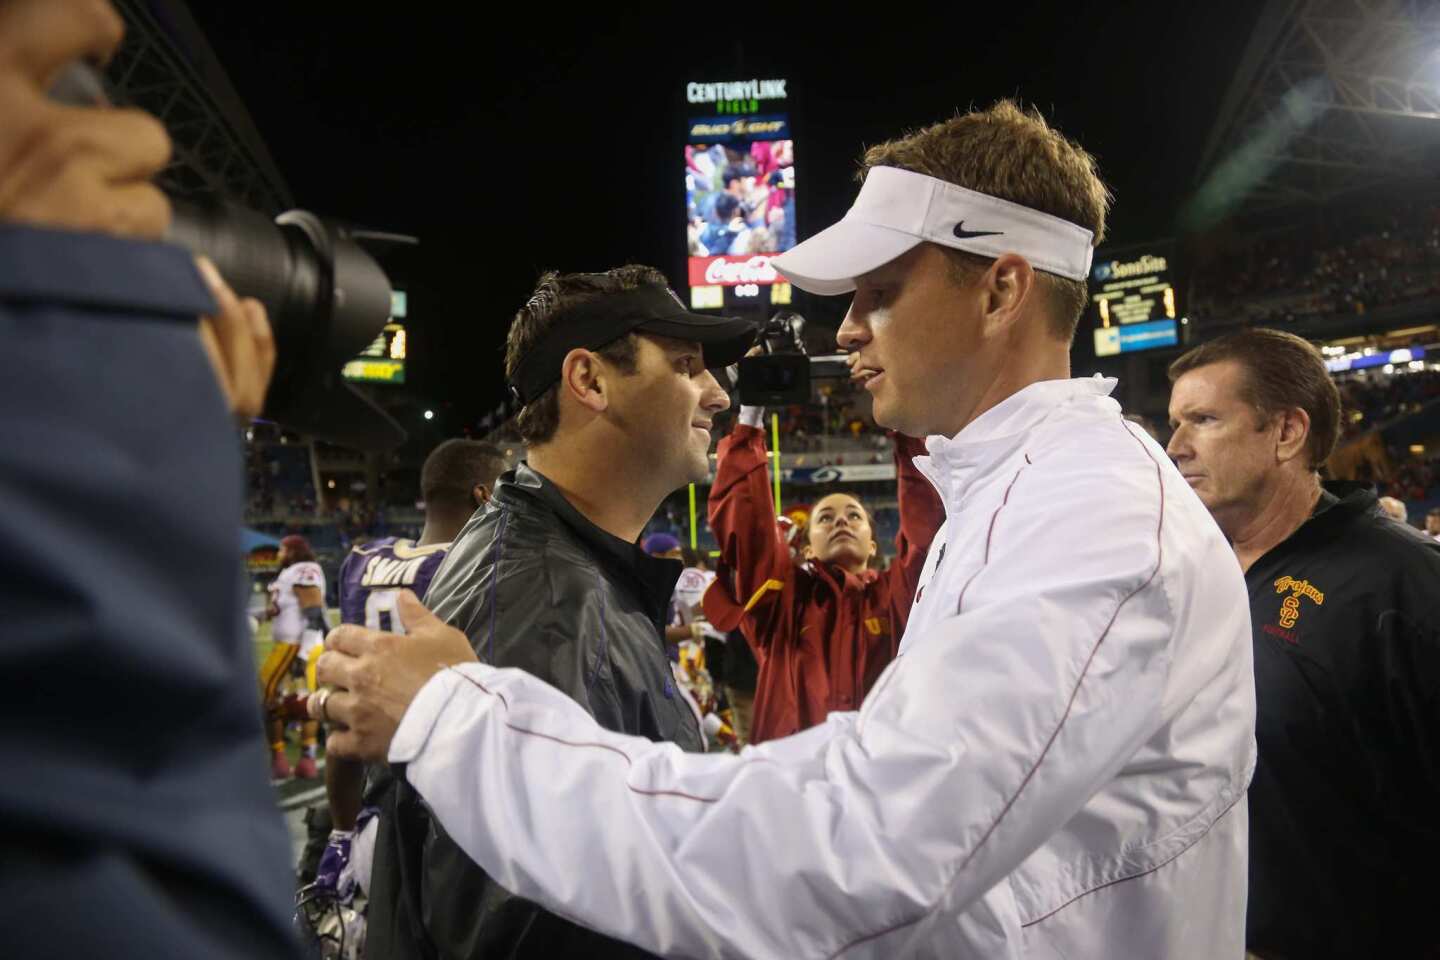 Washington coach Steve Sarkisian and USC's Lane Kiffin greet each other after the Trojans' 24-14 victory on Oct. 13, 2012.